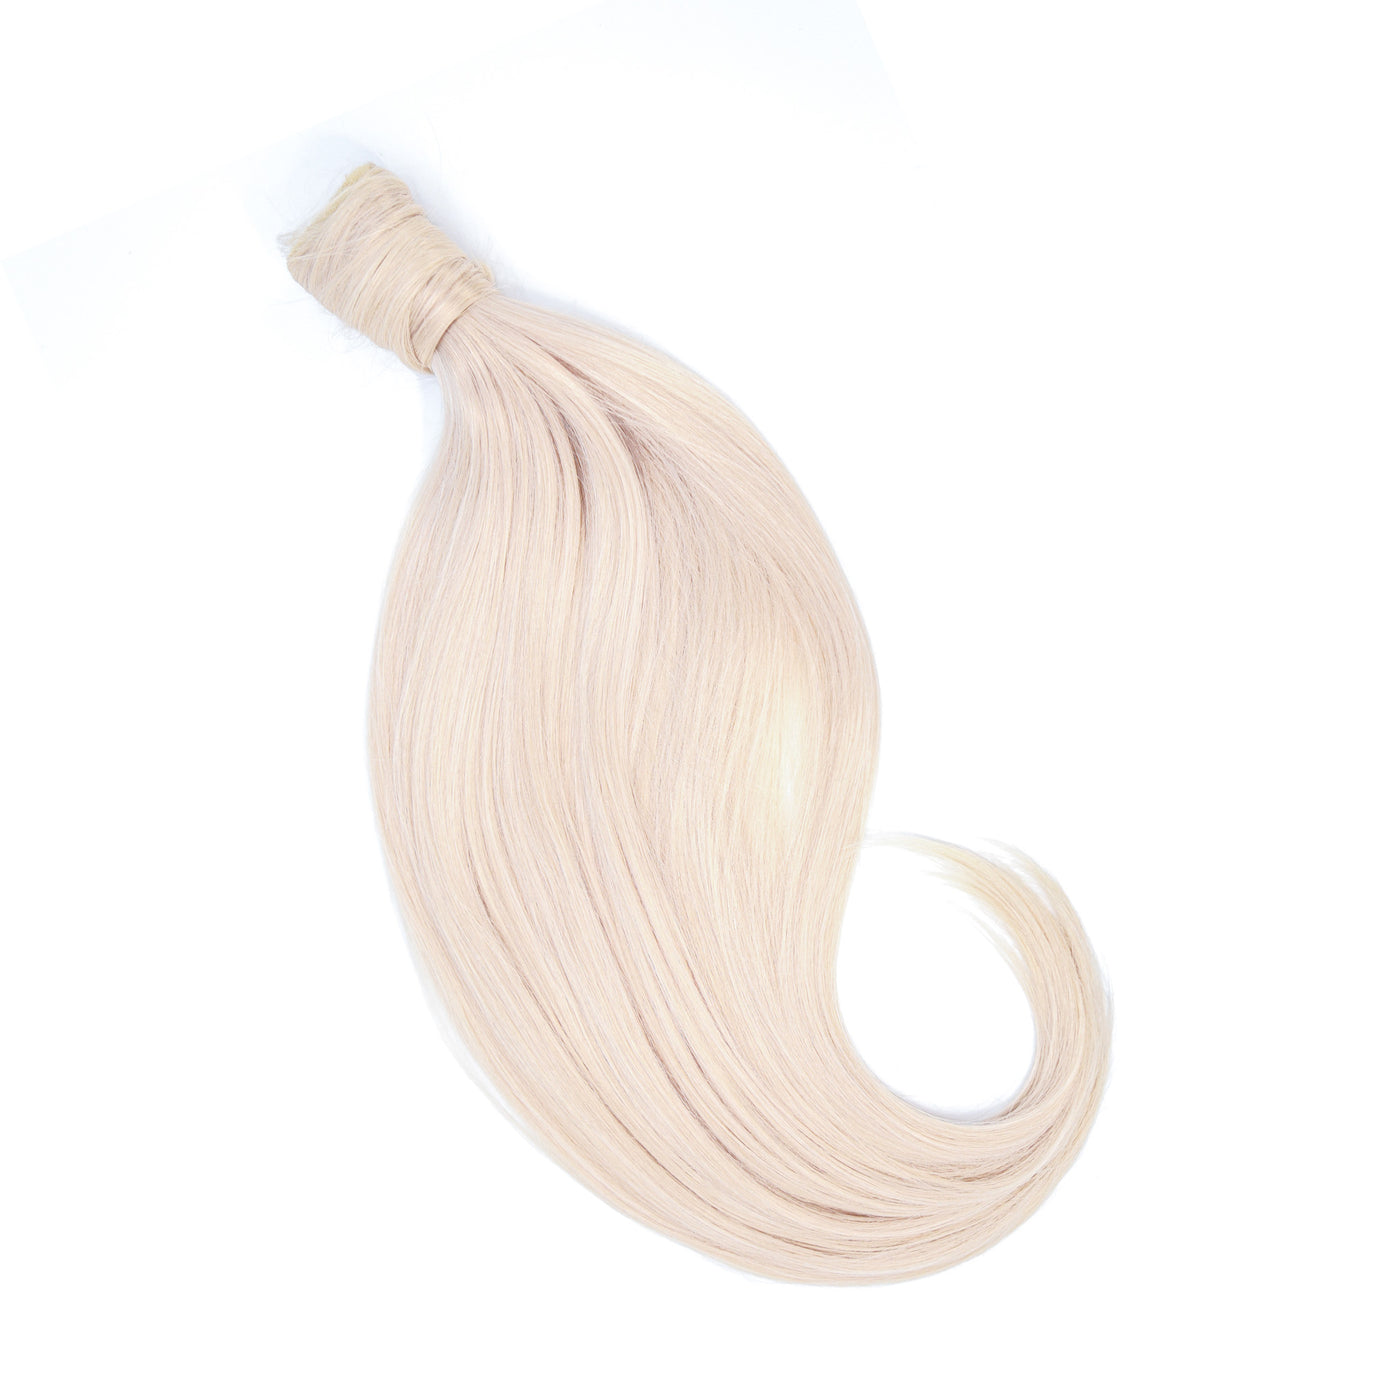 #62 AquaLyna Ponytail Hair Extension